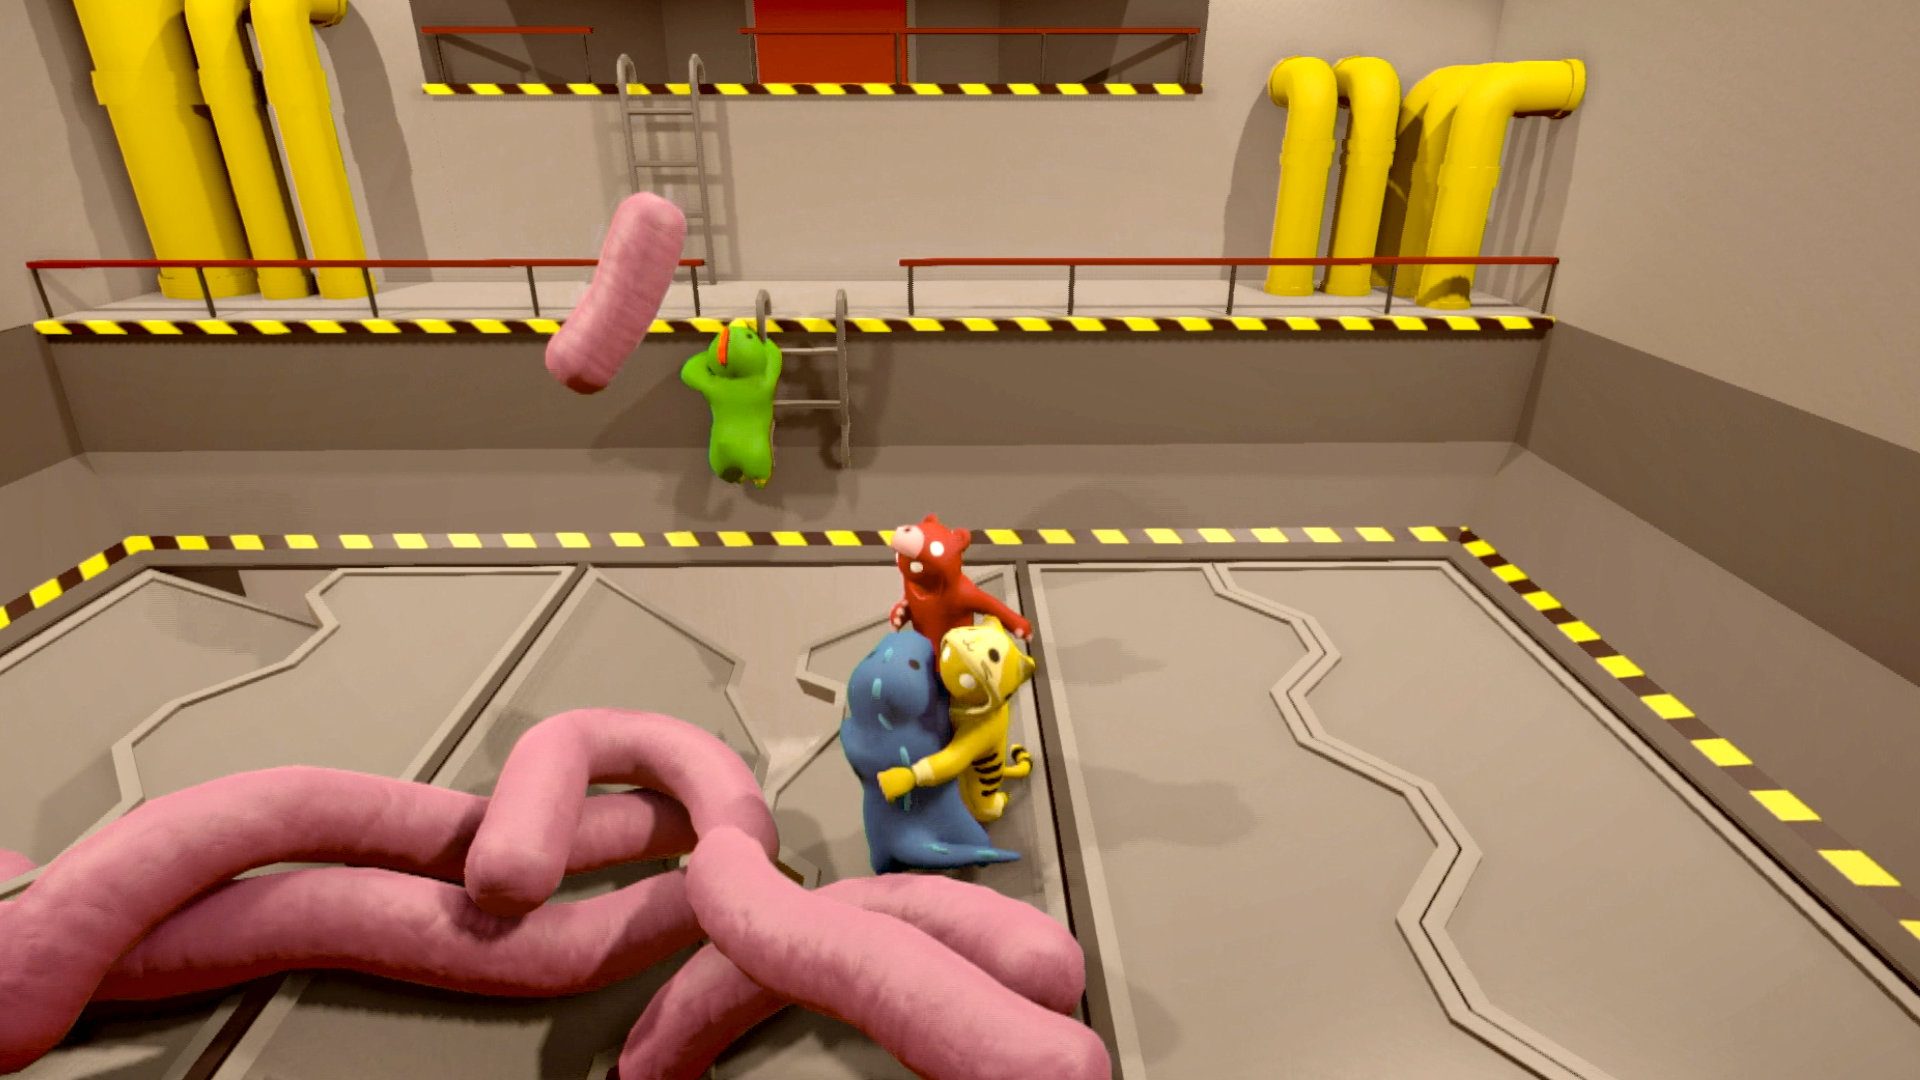 gang beasts for windows